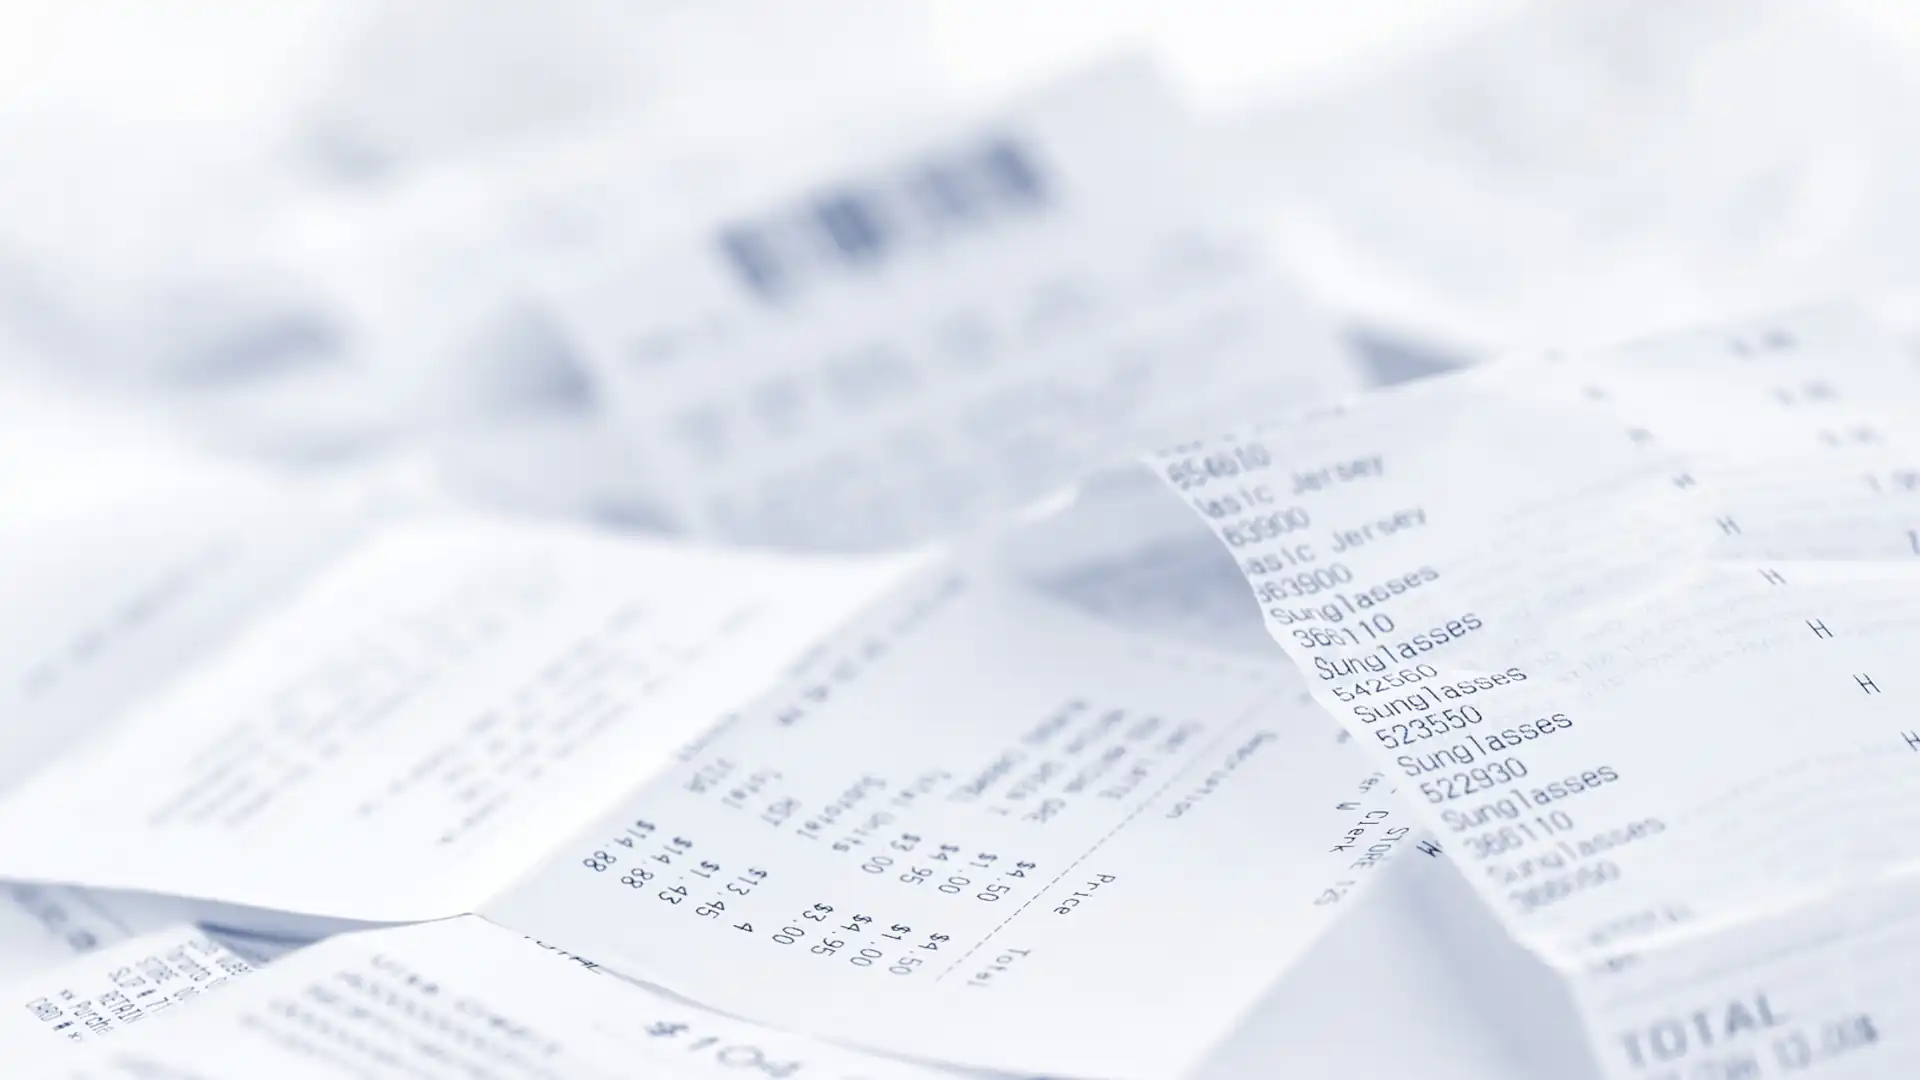 Expense management process – a pile of receipts